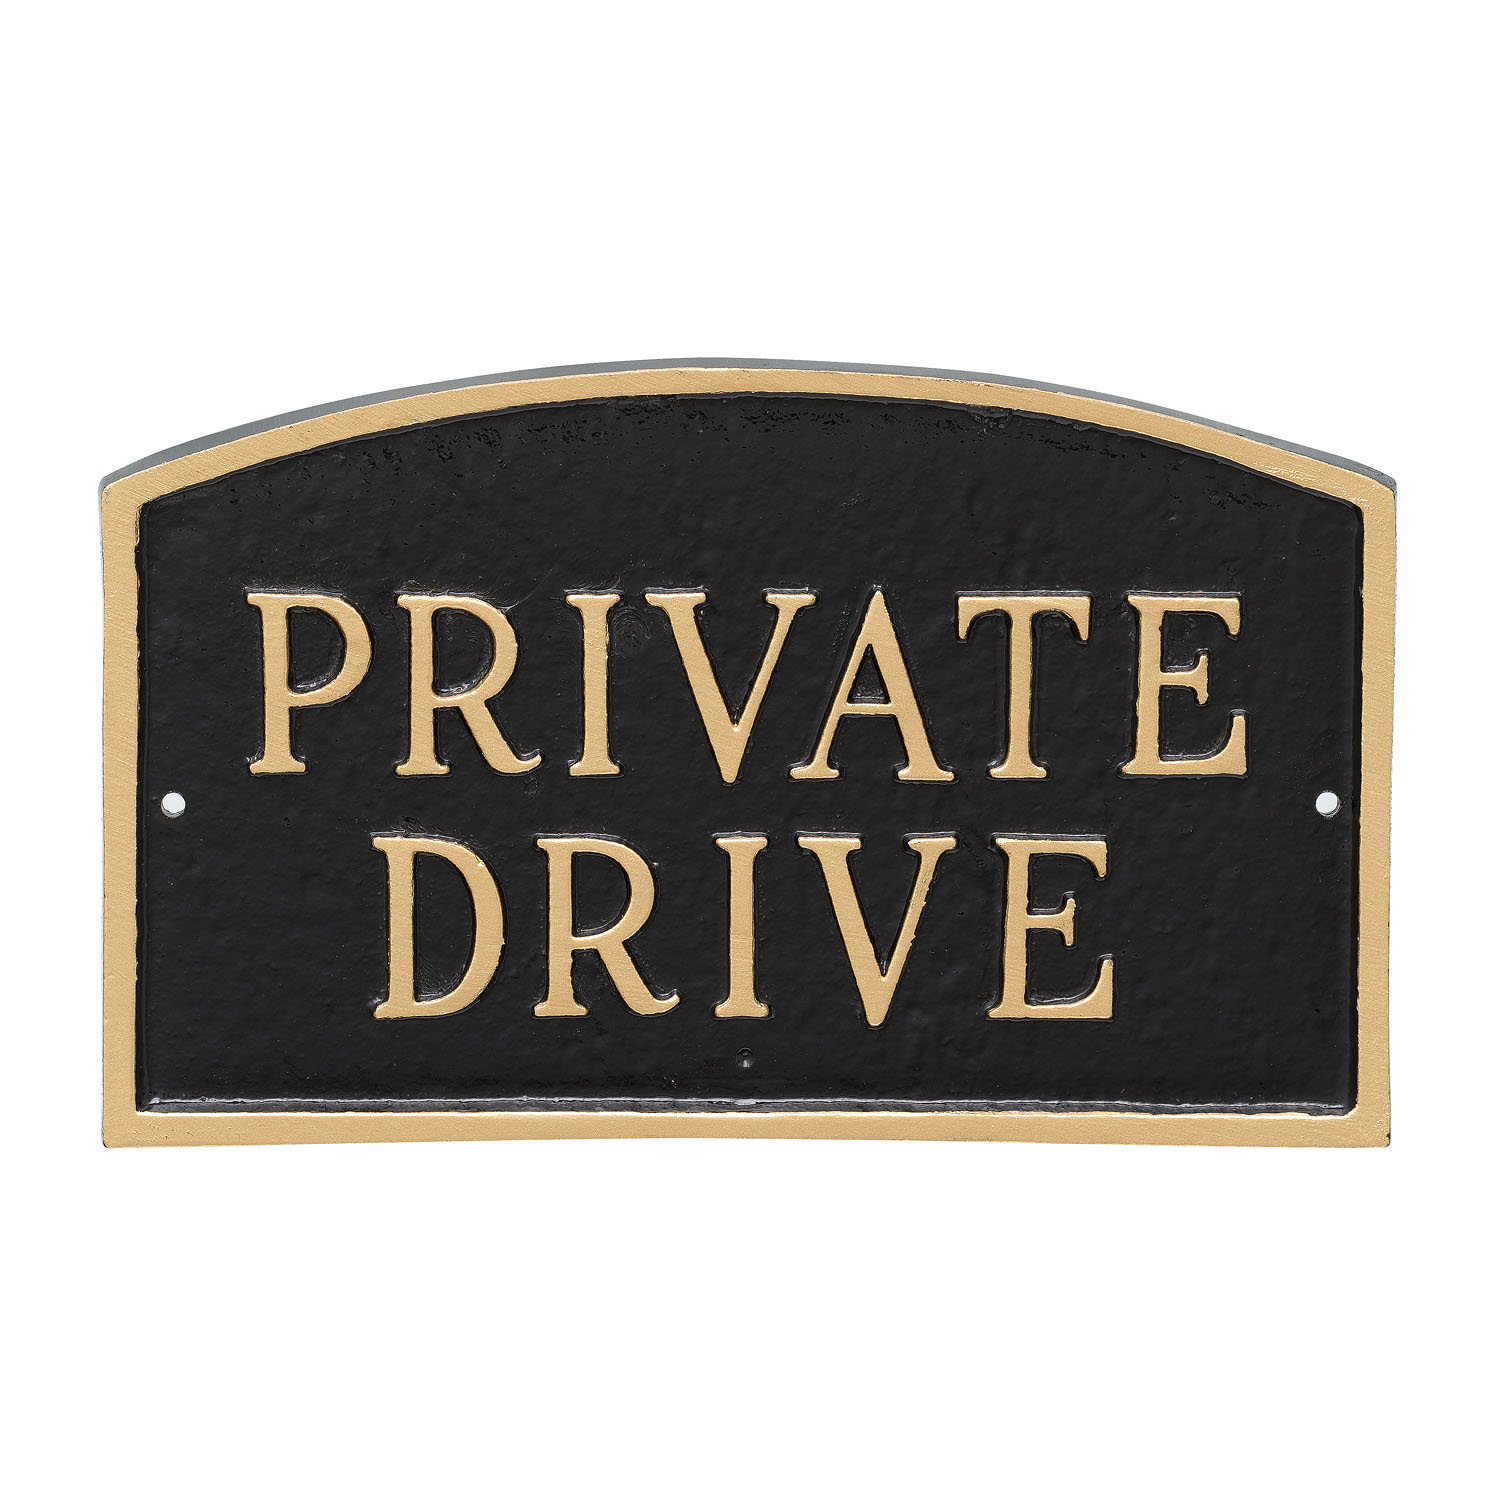 STOP PRIVATE DRIVE SIGN 8X12 ALUMINUM S013 